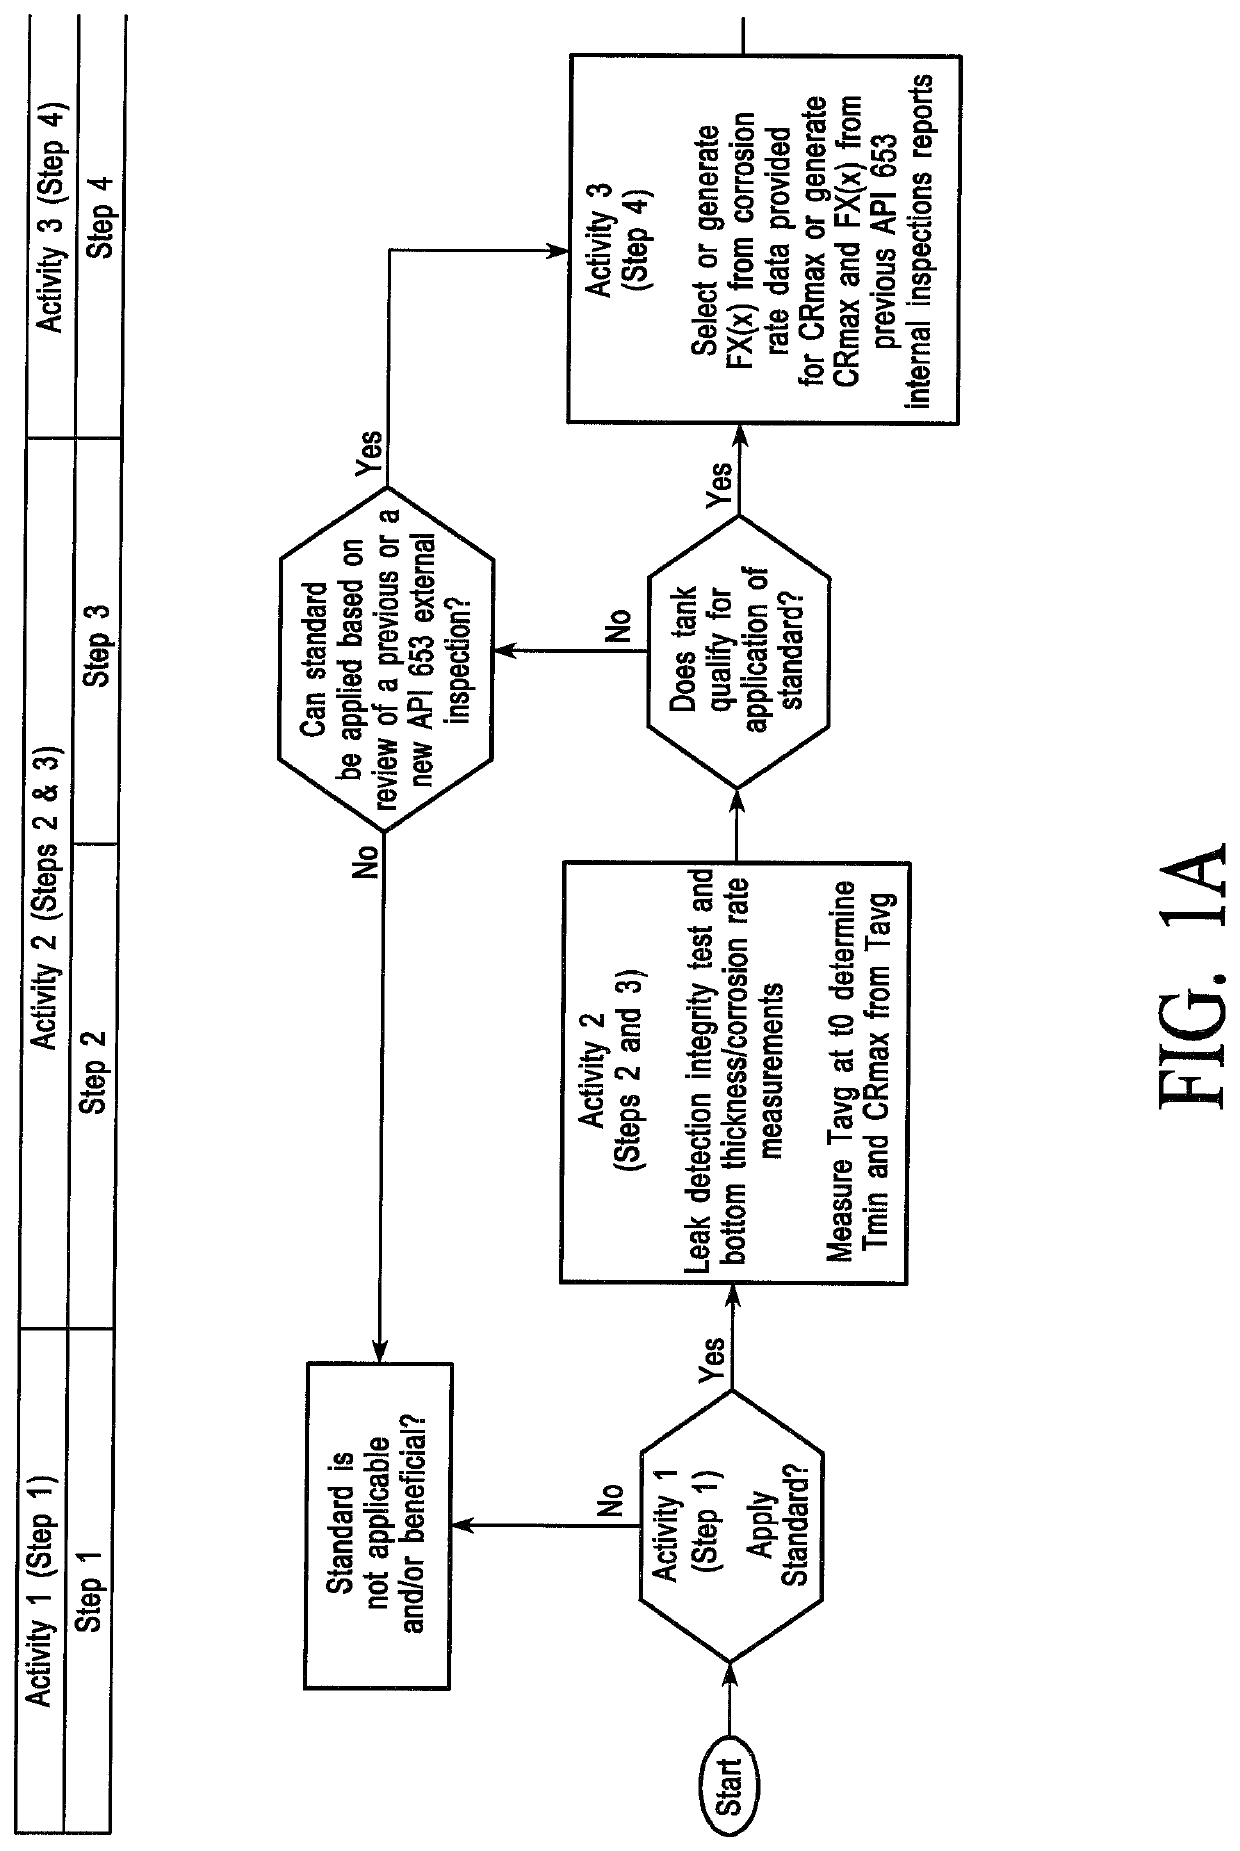 Measurement-based, in-service method for updating the internal inspection interval of an AST